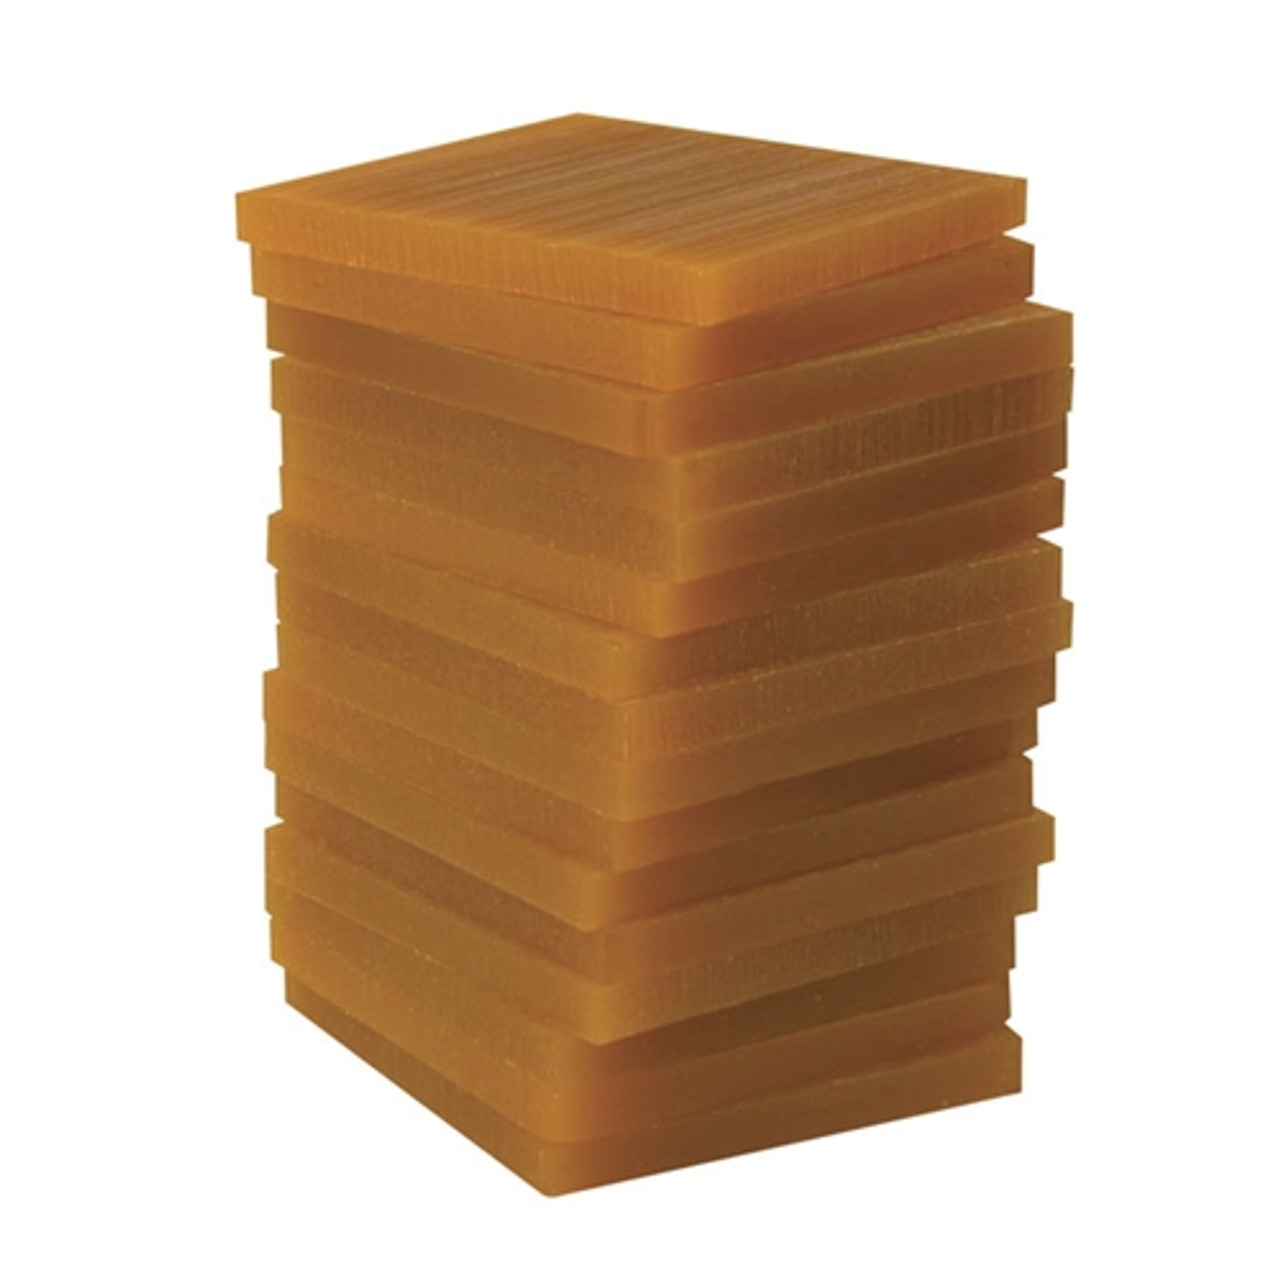 Wolf™ Milling Wax™ Slices - 10mm (1 lb. Box)